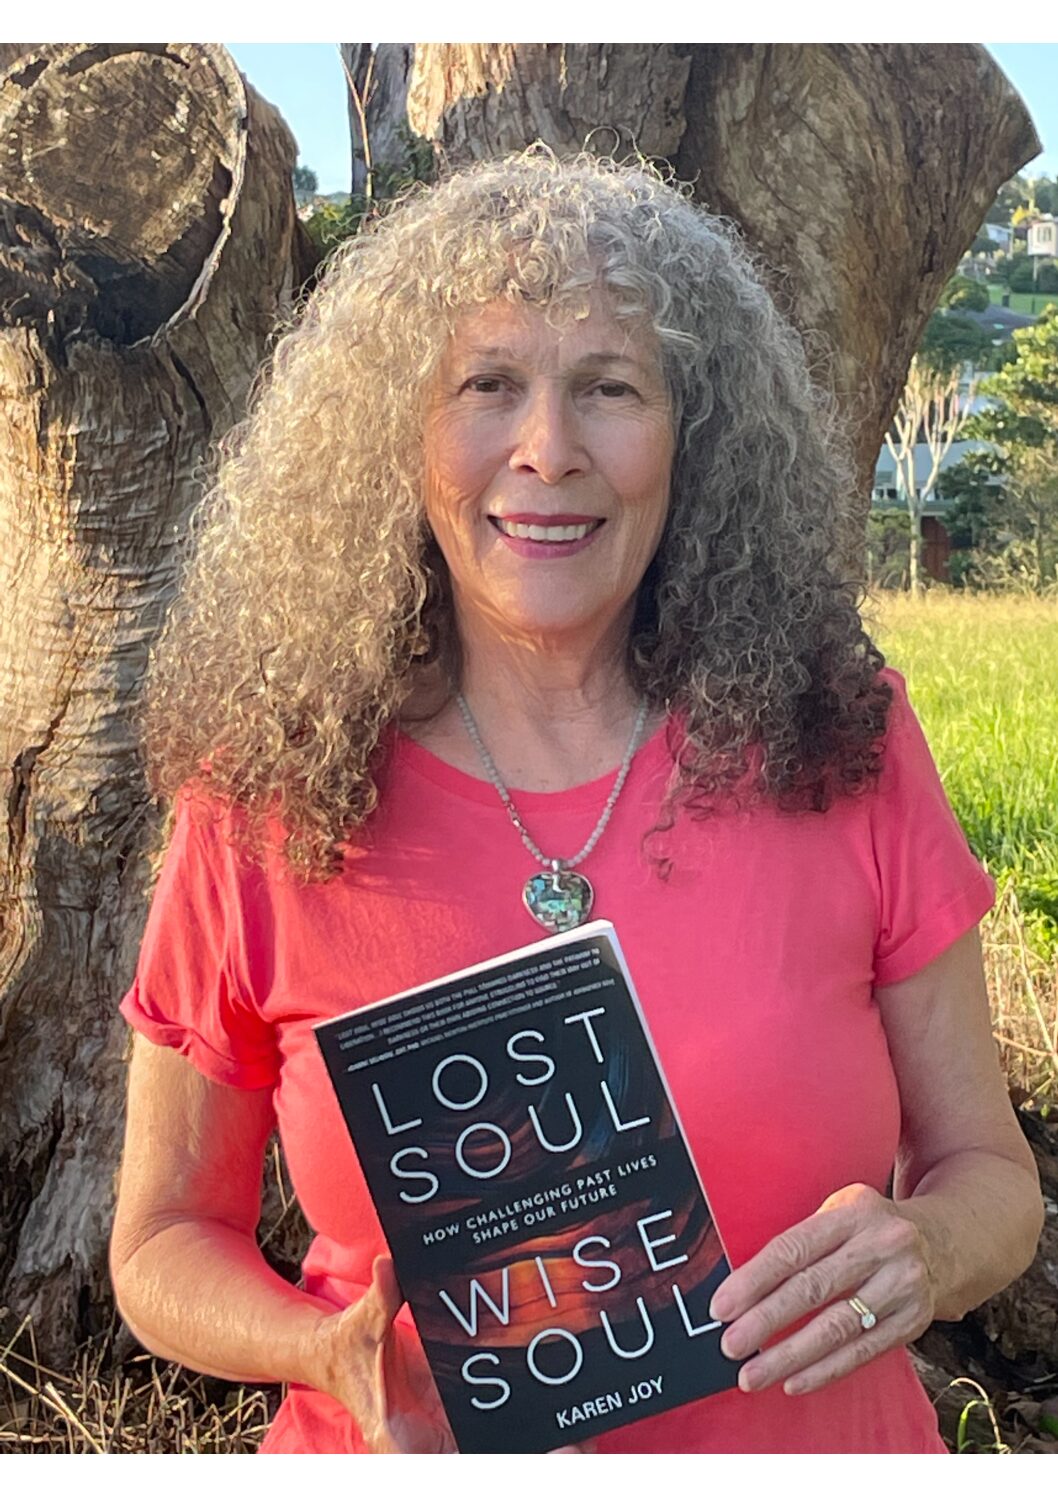 “Lost Soul, Wise Soul” now released